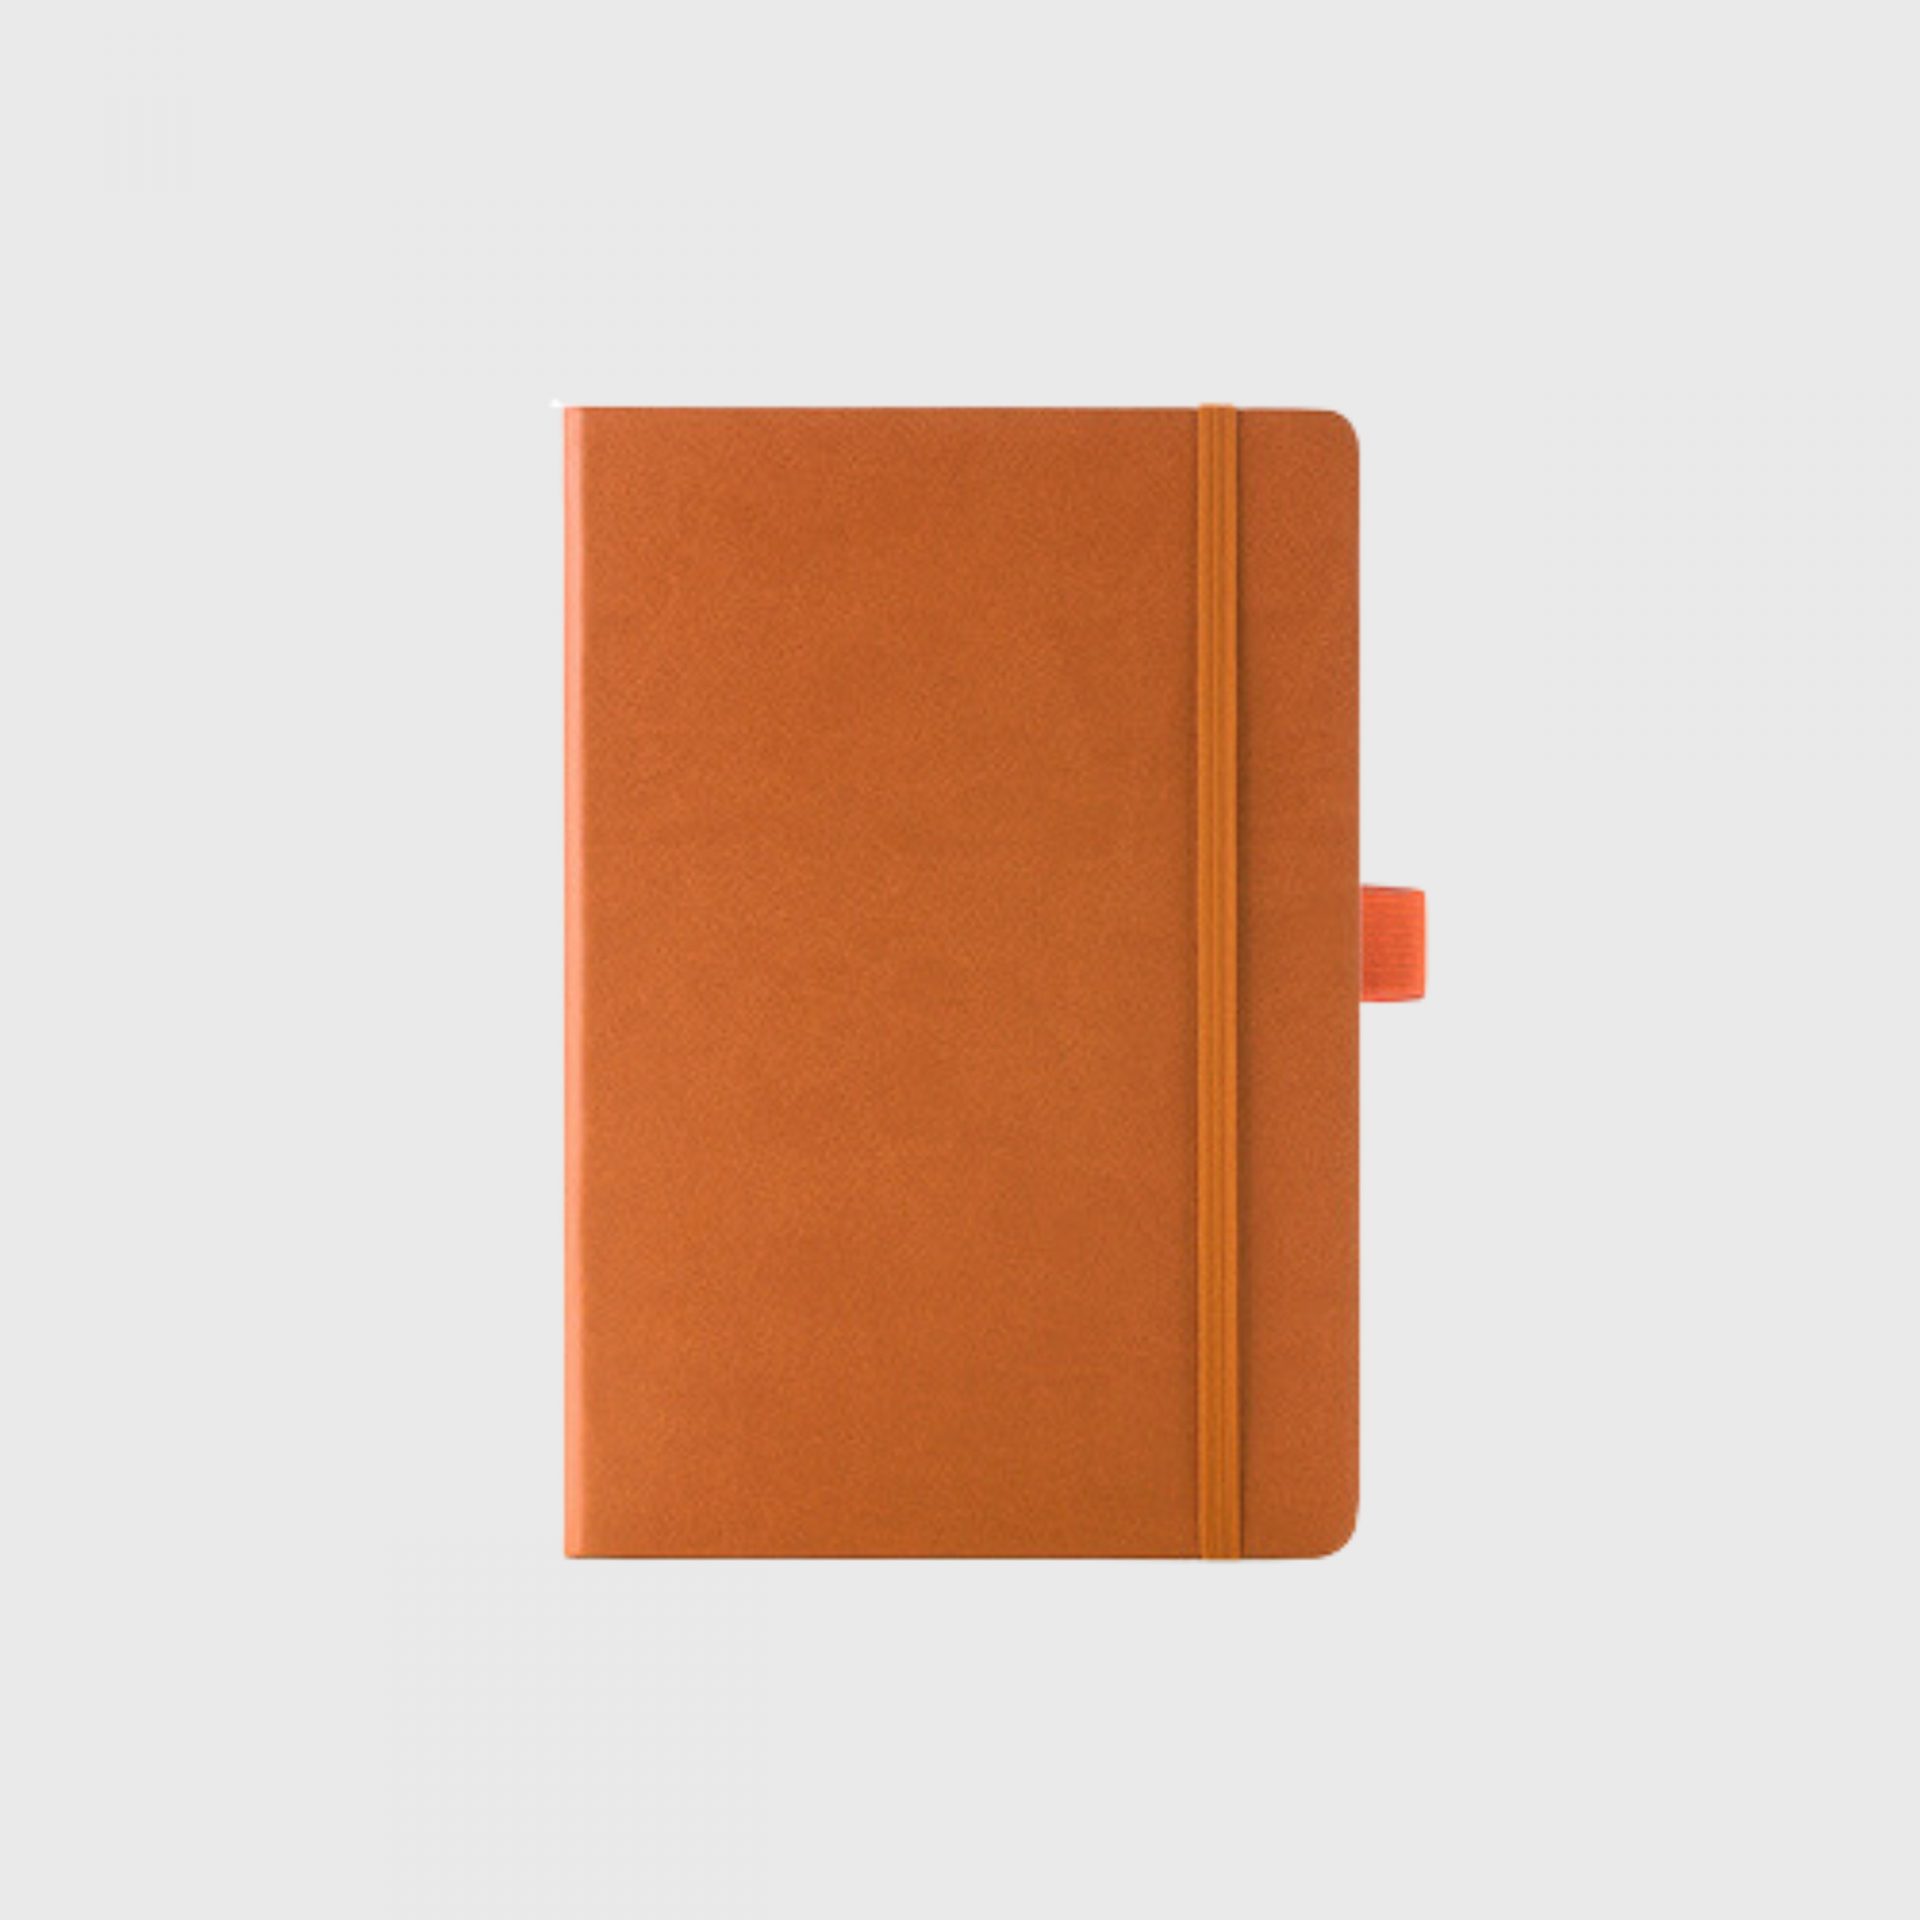 Corporate Gifts Singapore Notebook A5 Soft PU Leather Hard Cover Orange with pen holder